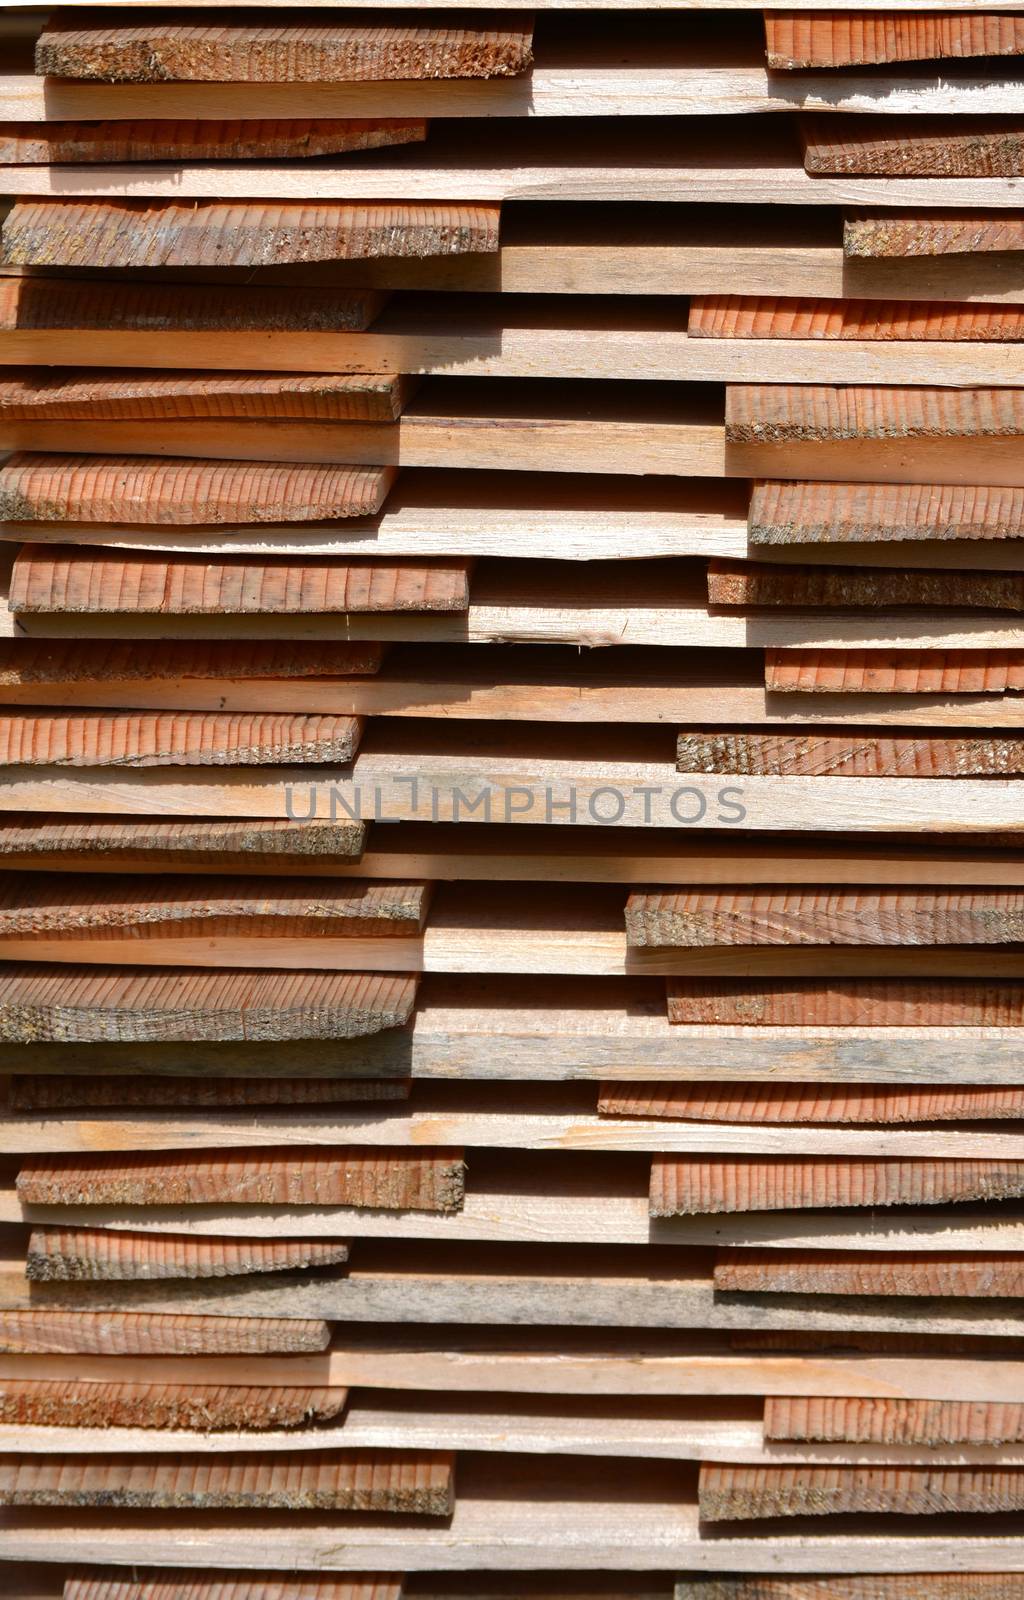 Stack of shingles laid to dry by hibrida13